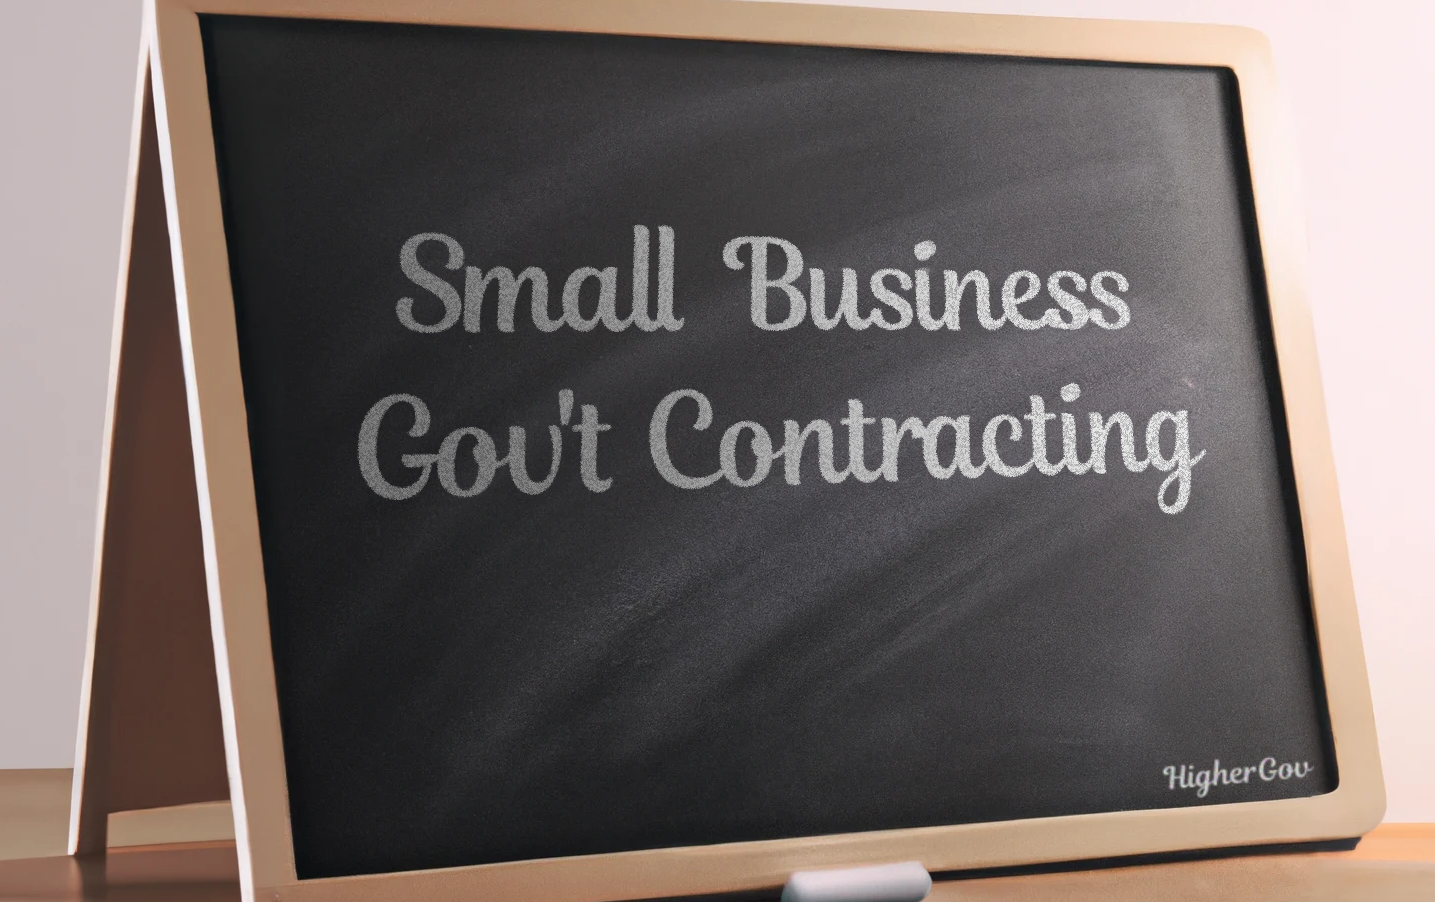 Small Business Government Contracting Chalk Board